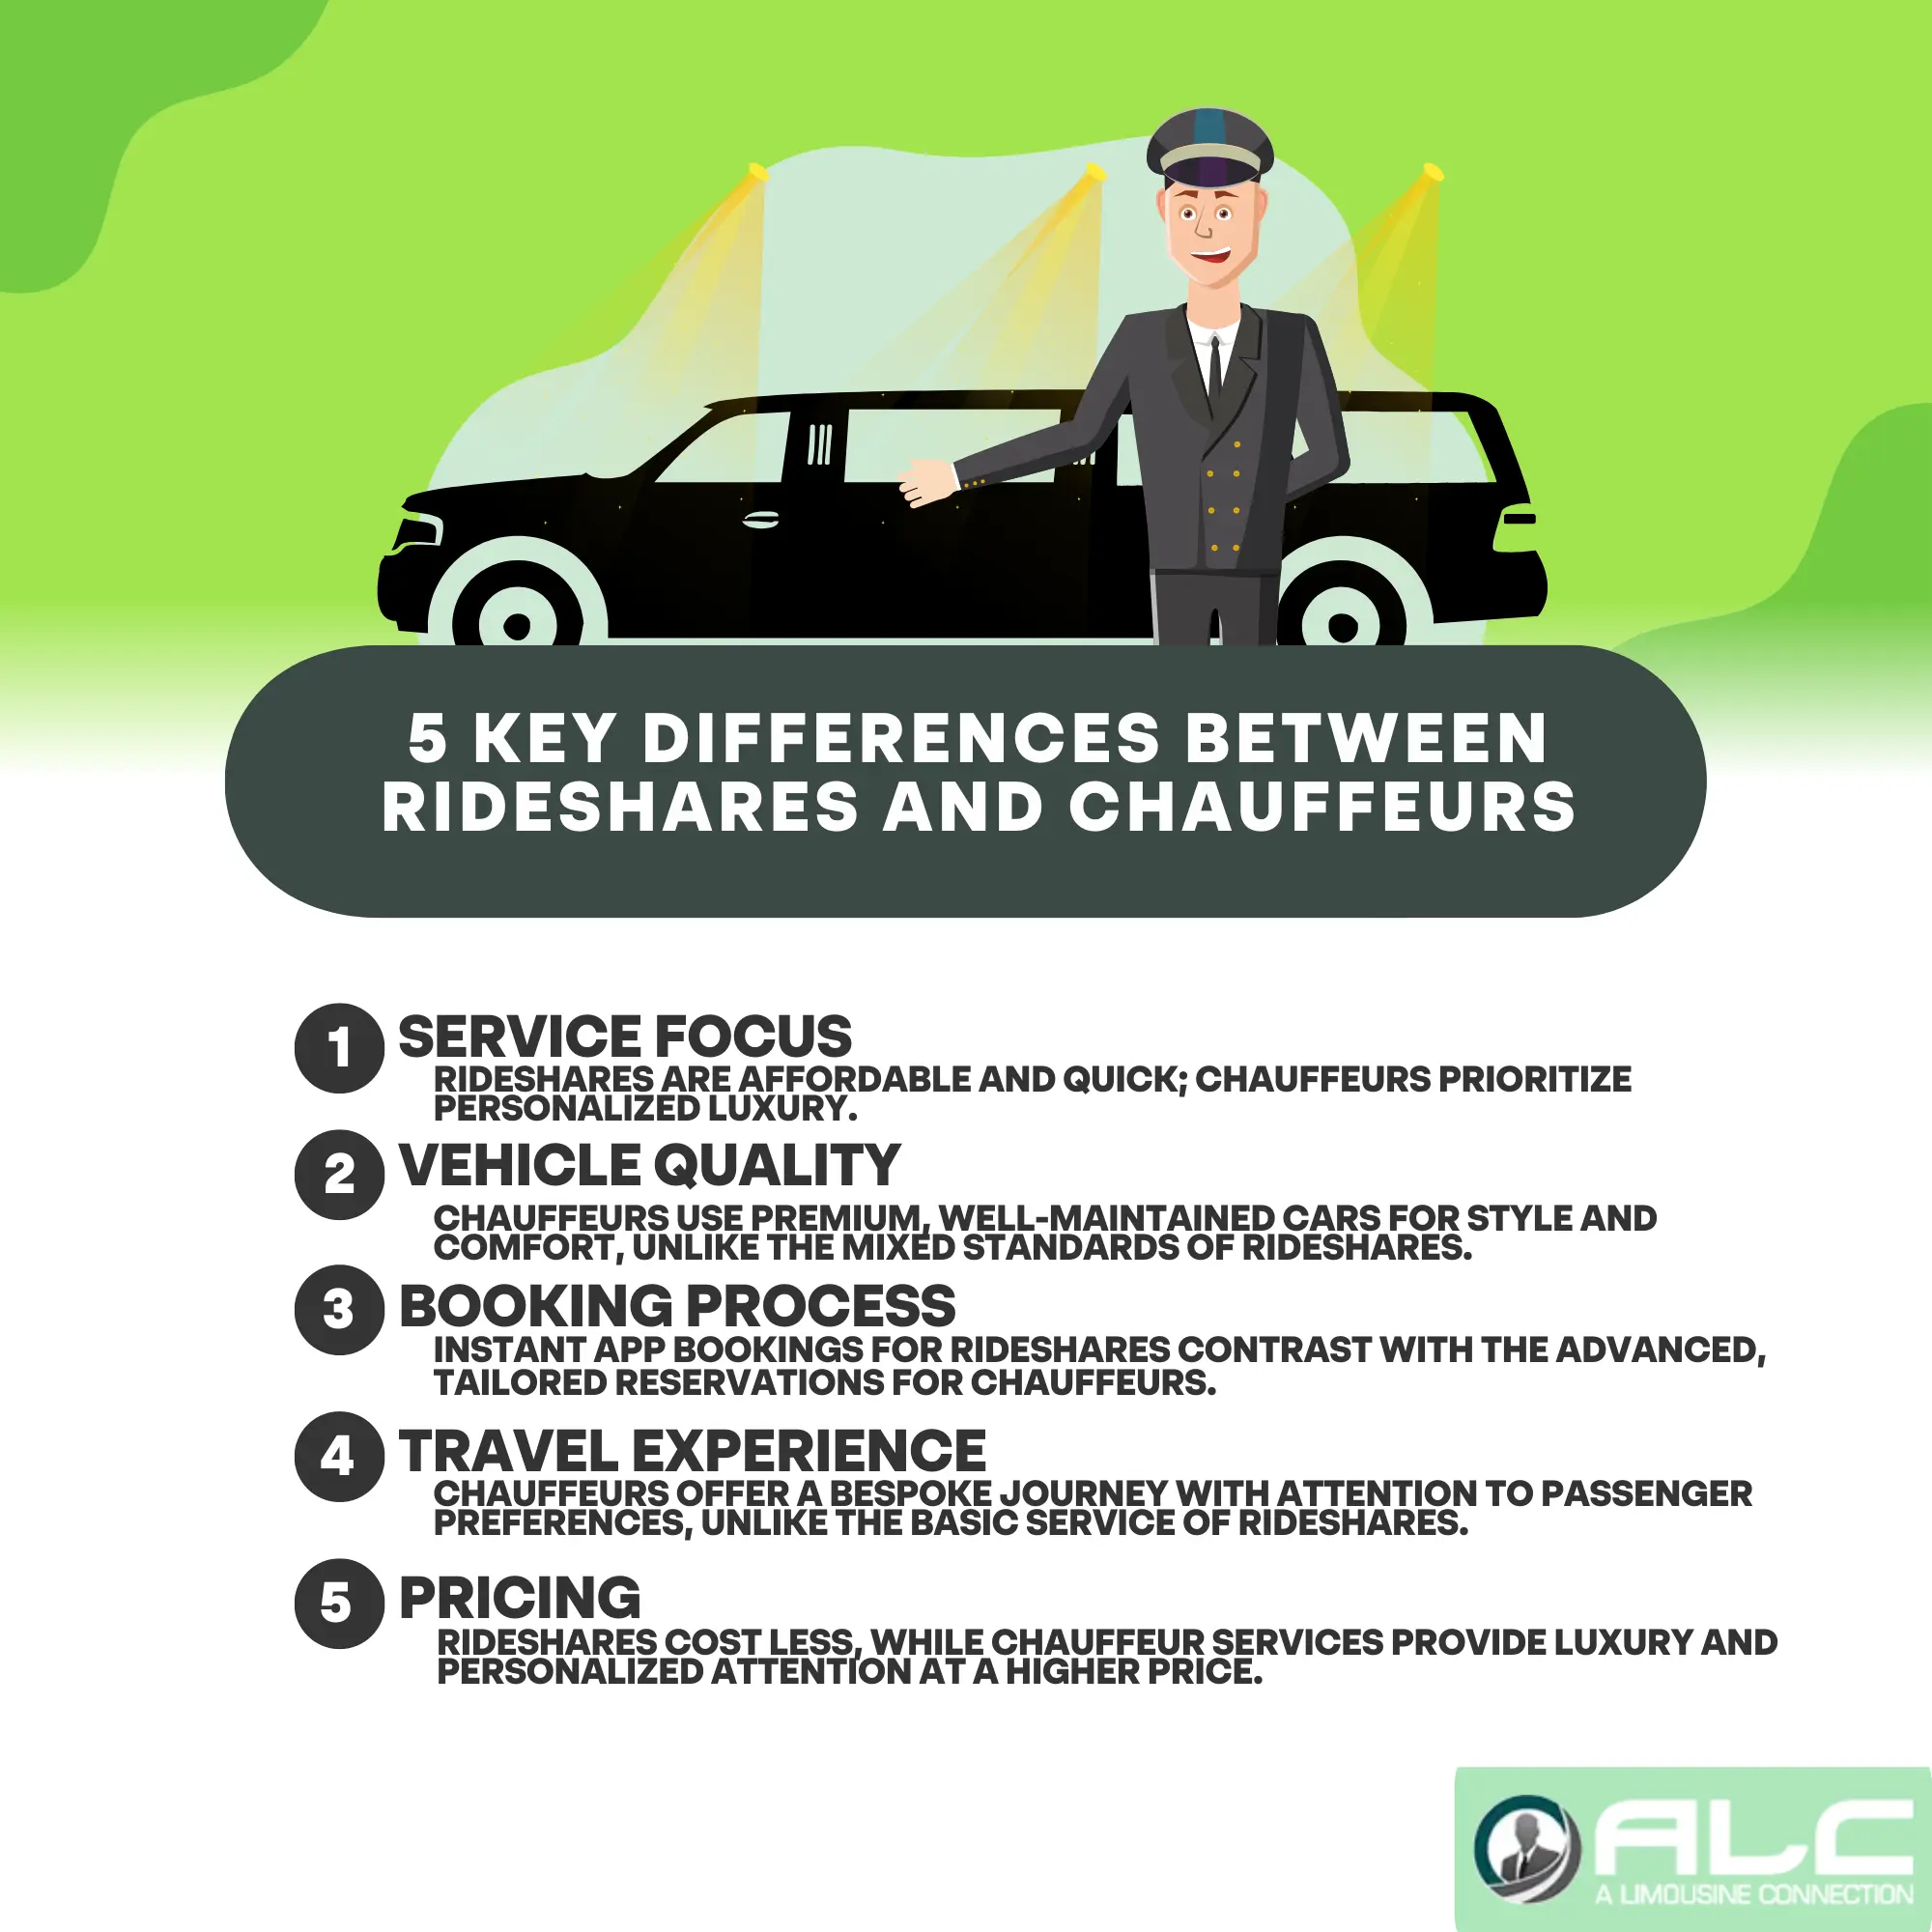 5 Key Differences Between Rideshares and Chauffeurs You Should Know